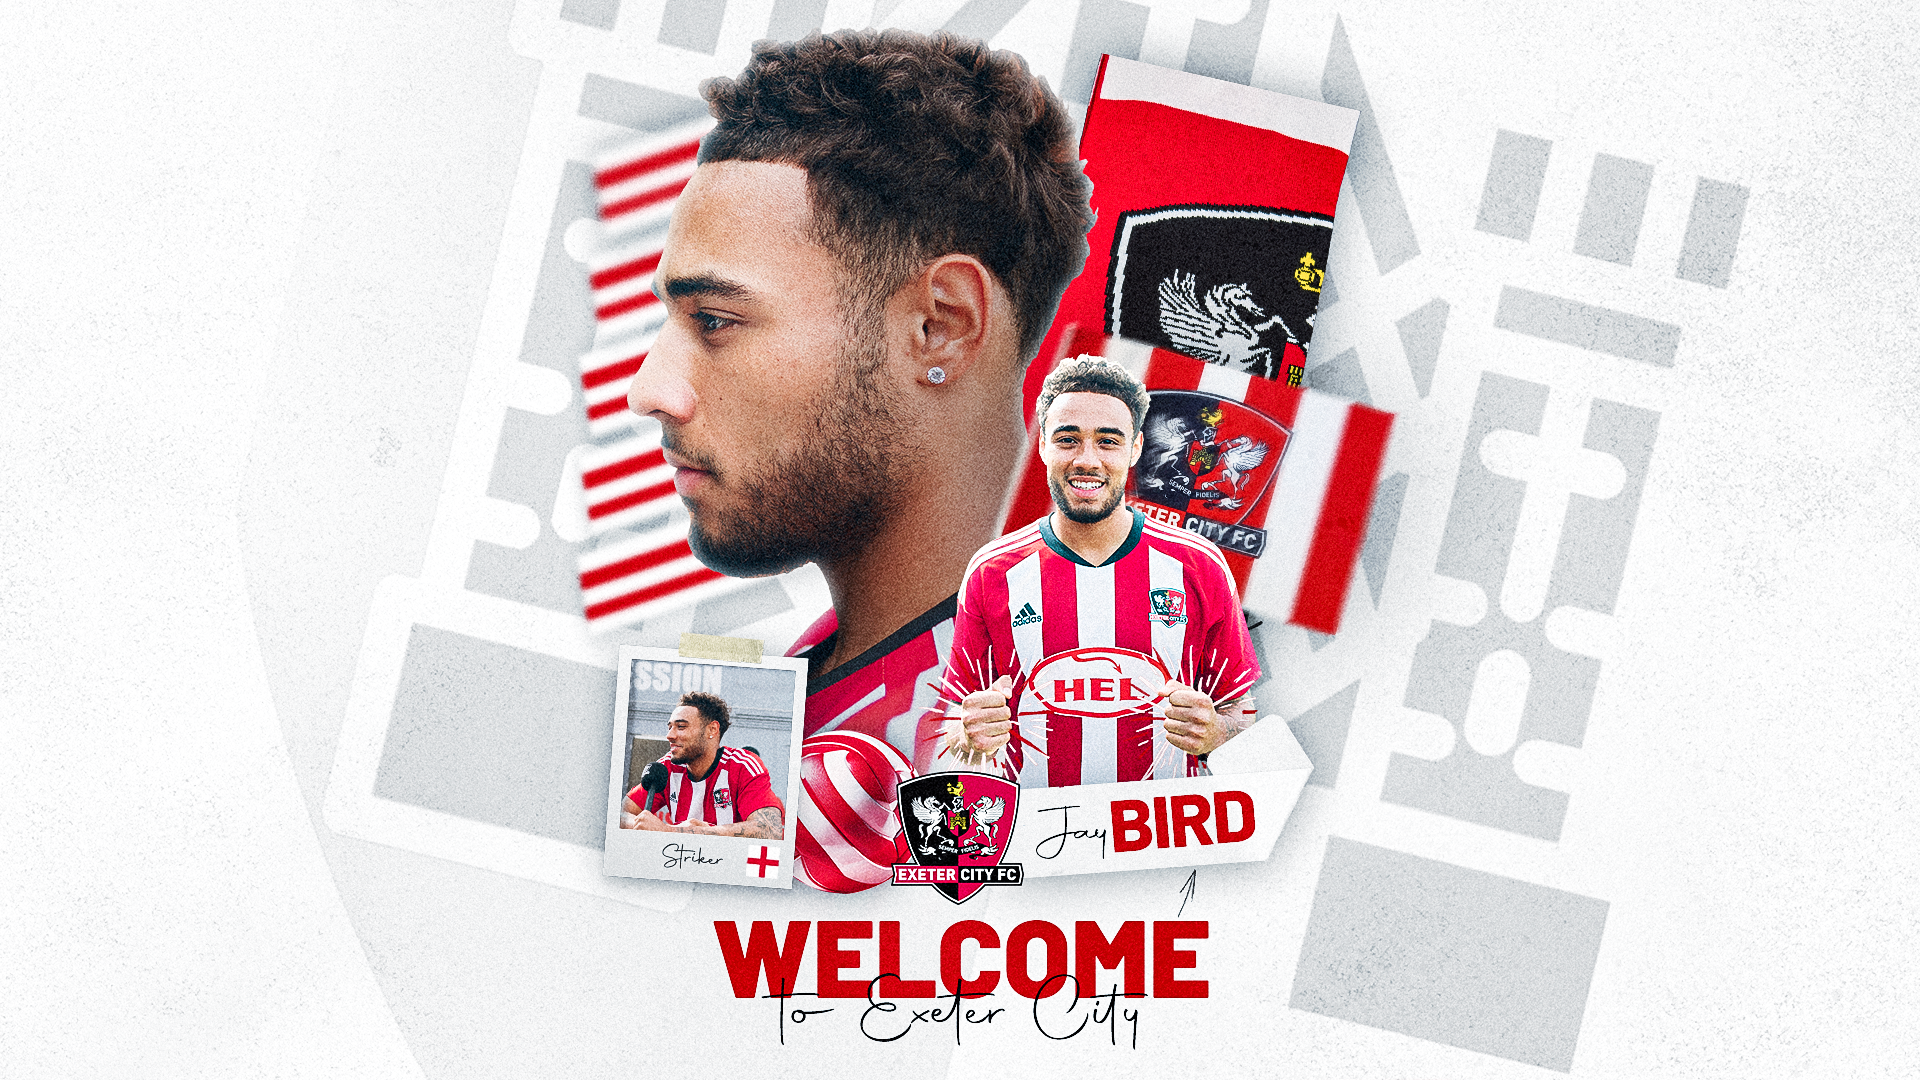 Image of Jay Bird welcoming him to the club, including head shot and side profile